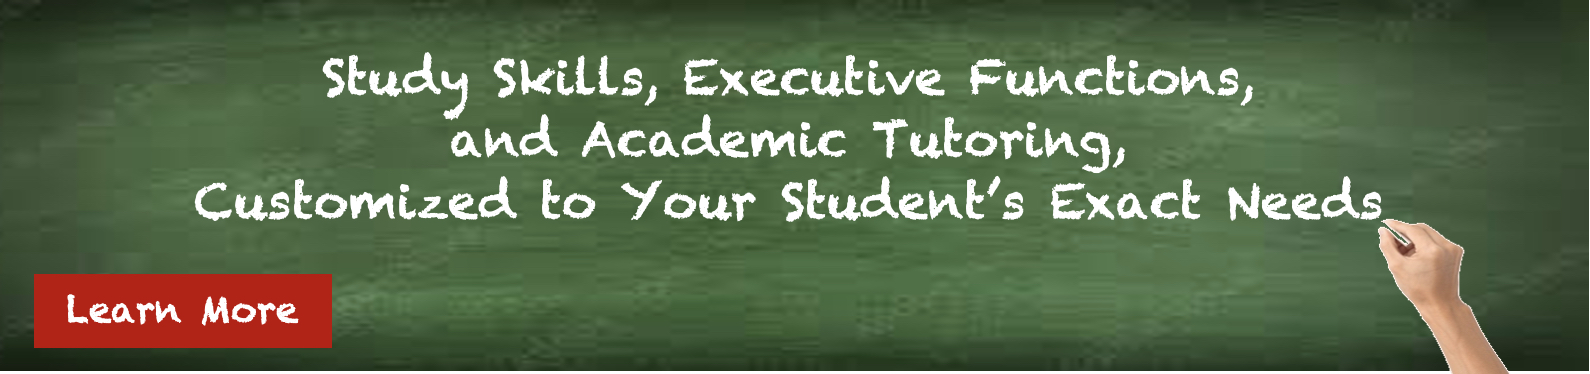 Study Skills, Executive Function, and Academic Tutoring, Customized to Your Student's Exact Needs